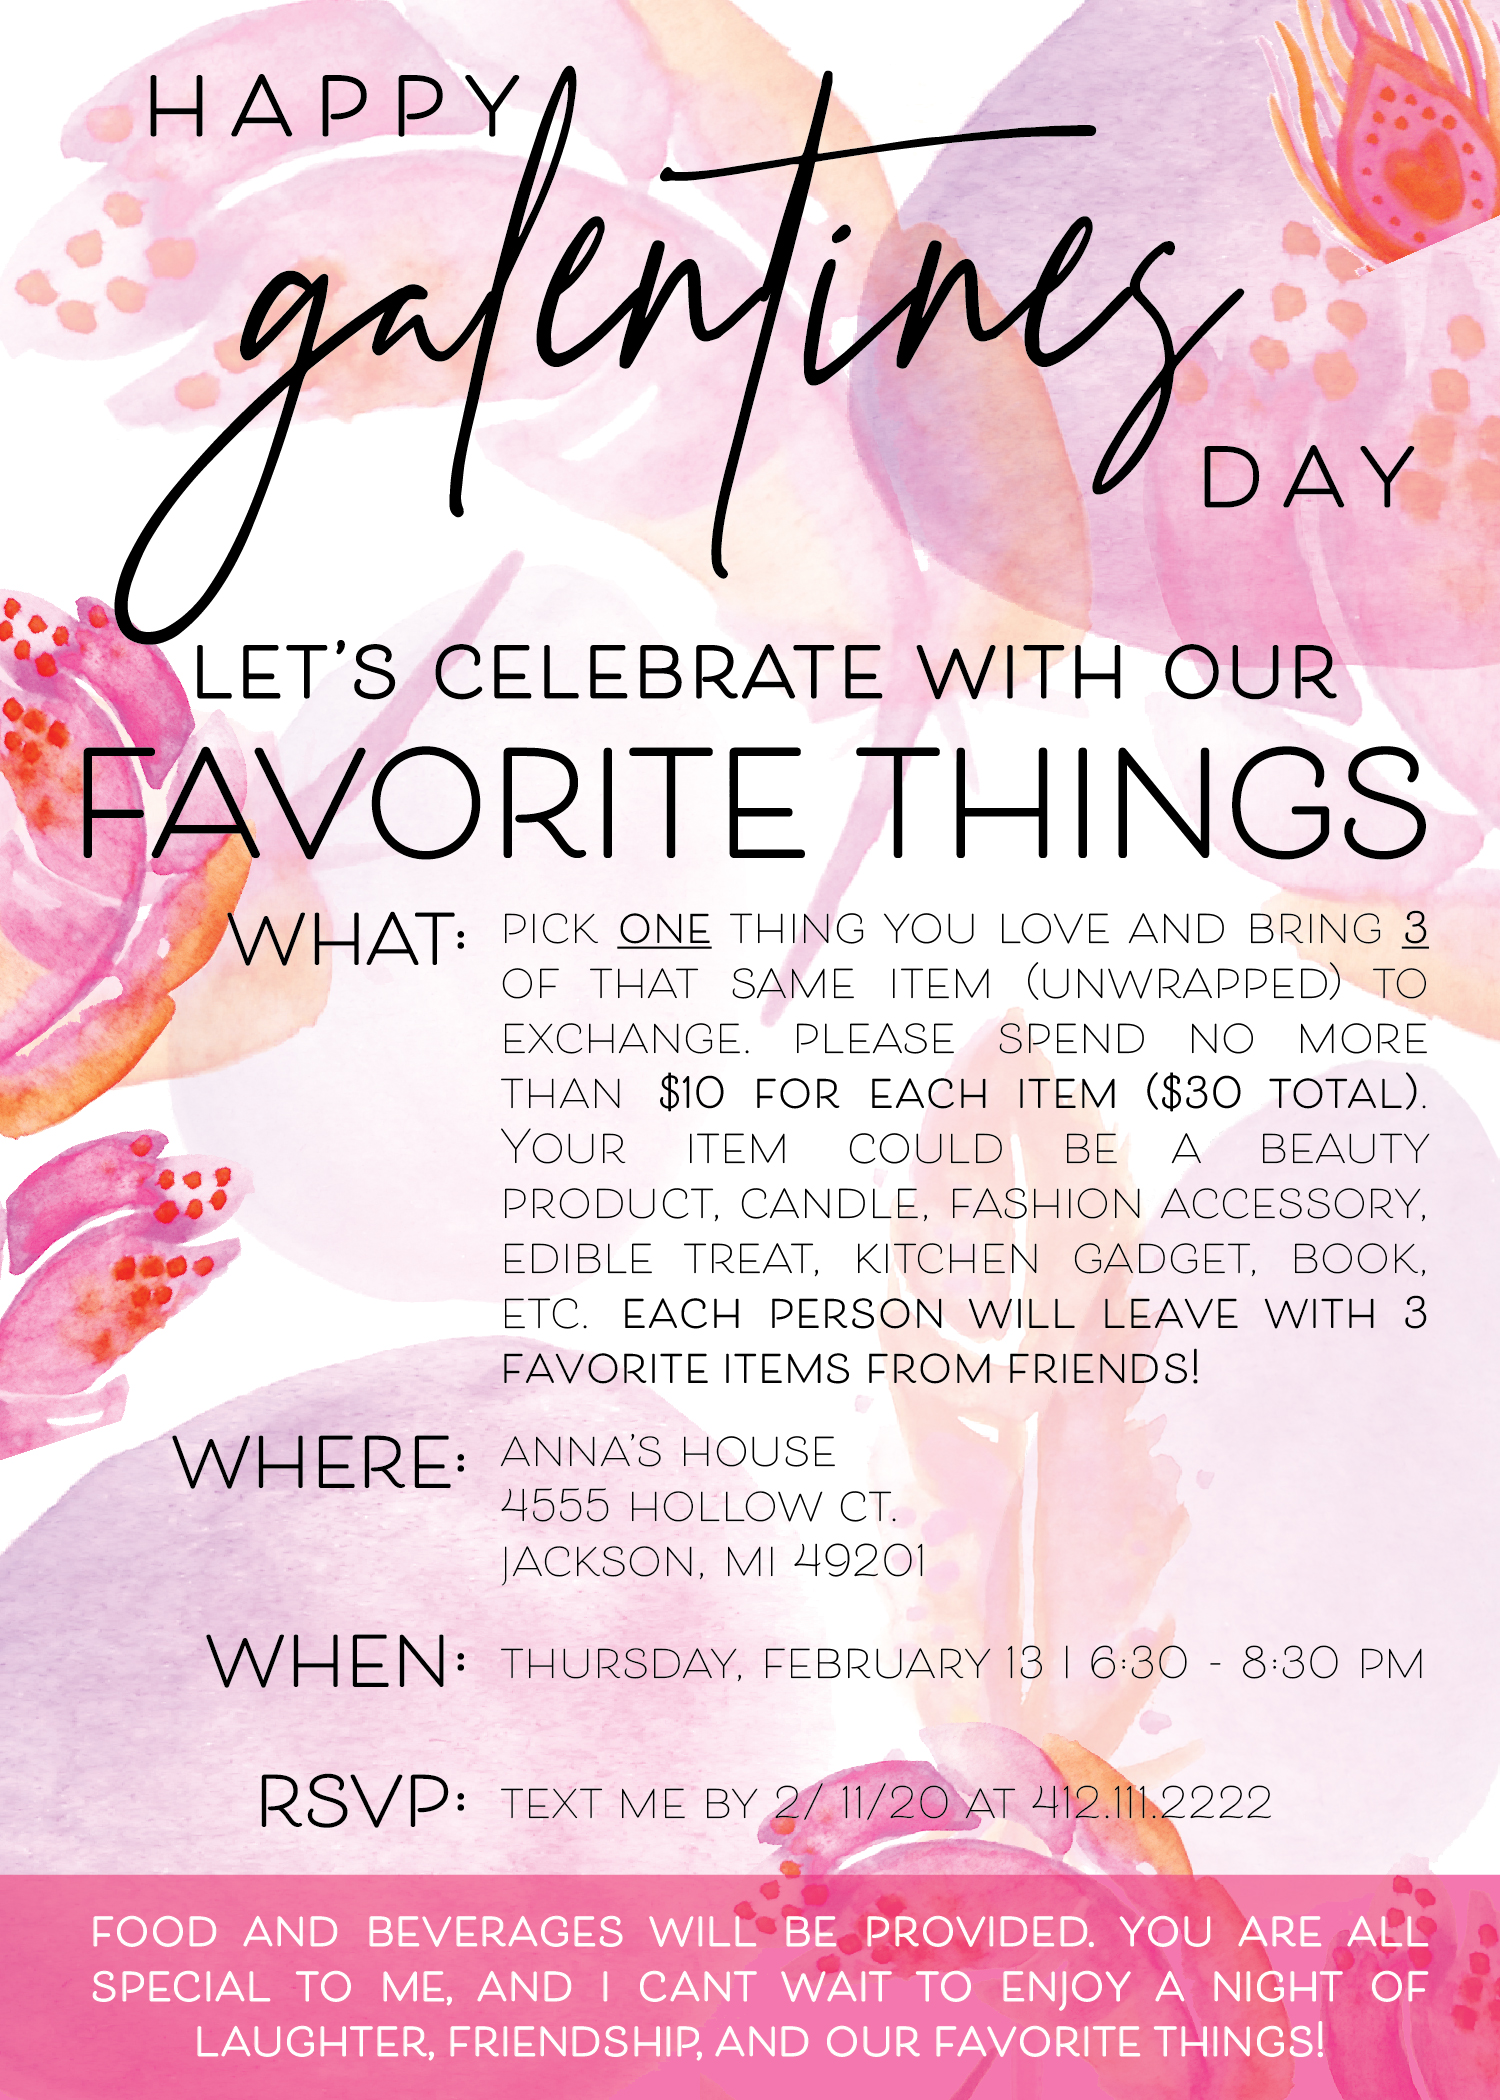 Galentine’s Party Favorite Things Edition